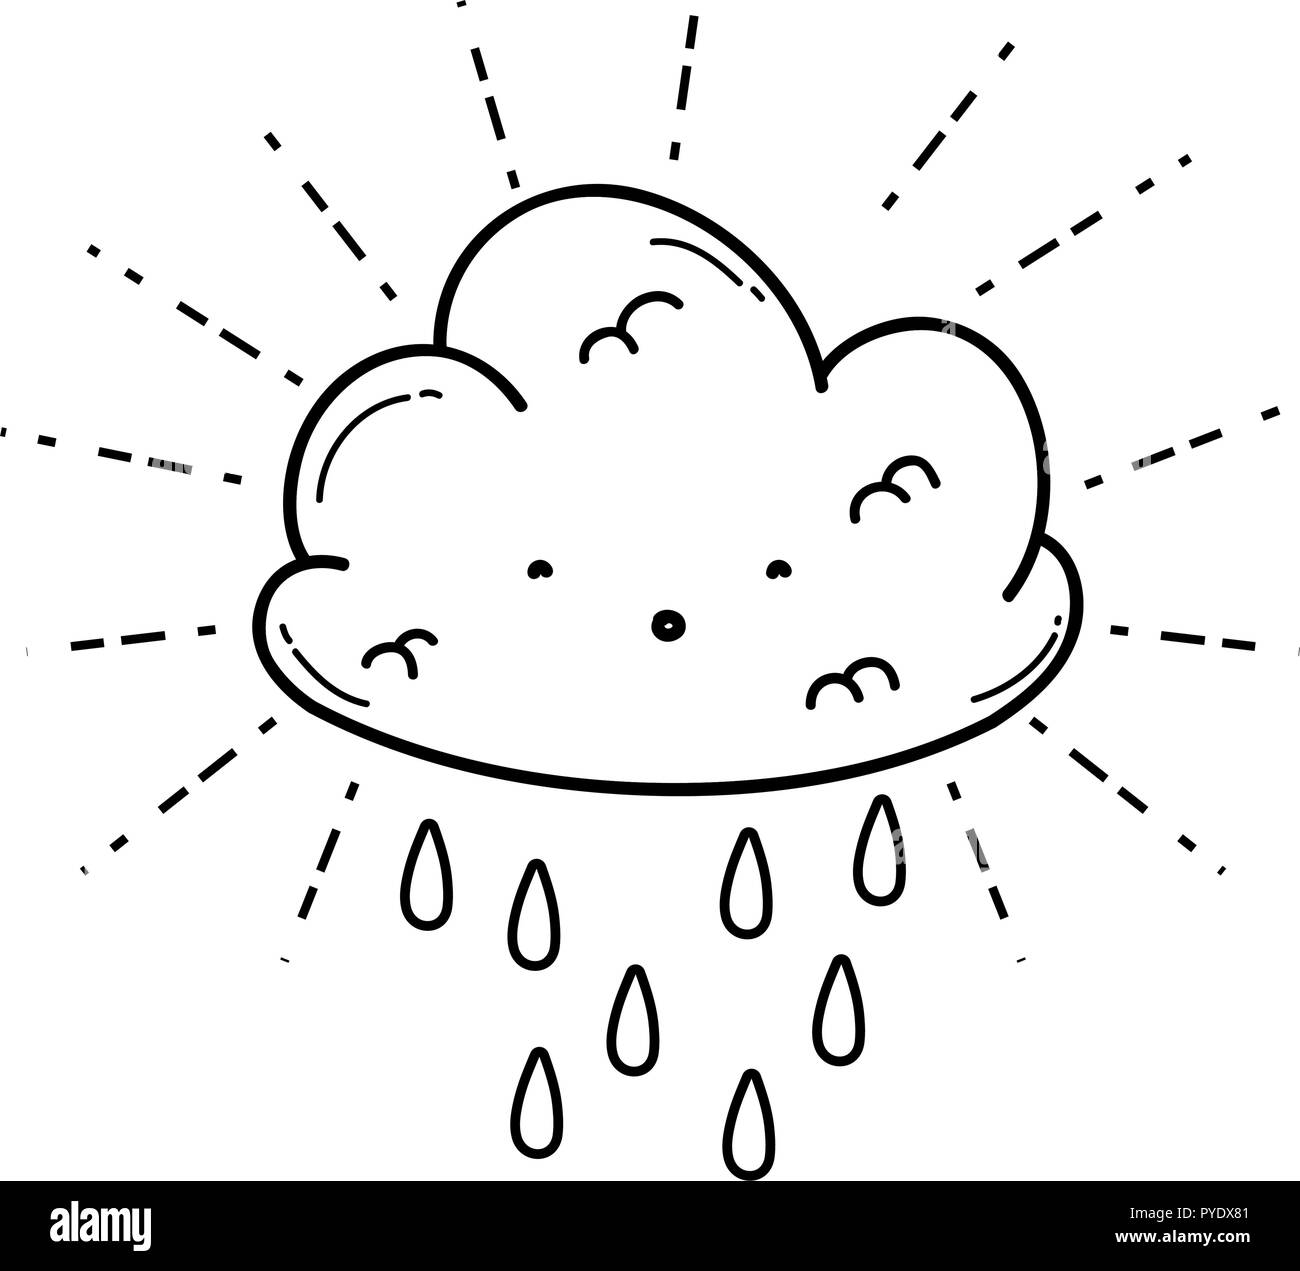 Cute cloud cartoon in black and white Stock Vector